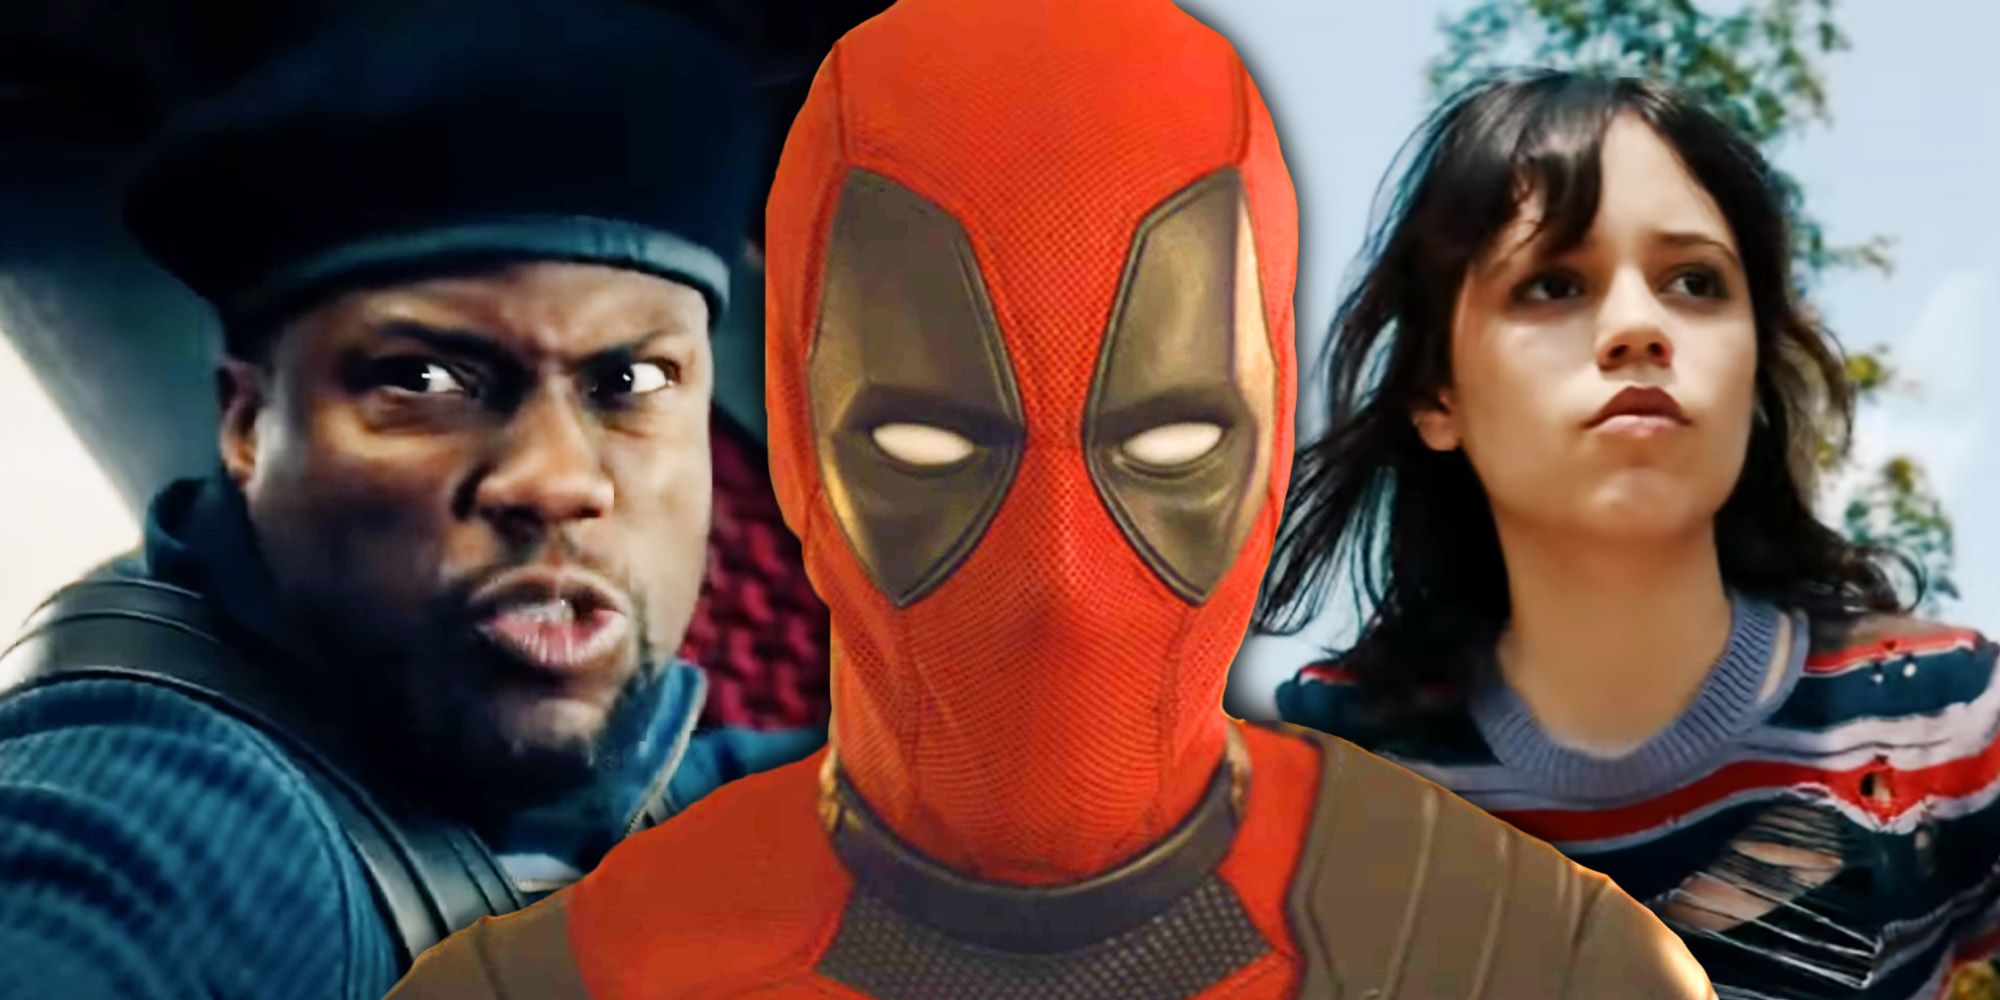 Deadpool from Deadpool & Wolverine, Jenny Ortega from Beetlejuice 2, and Kevin Hart from Borderlands